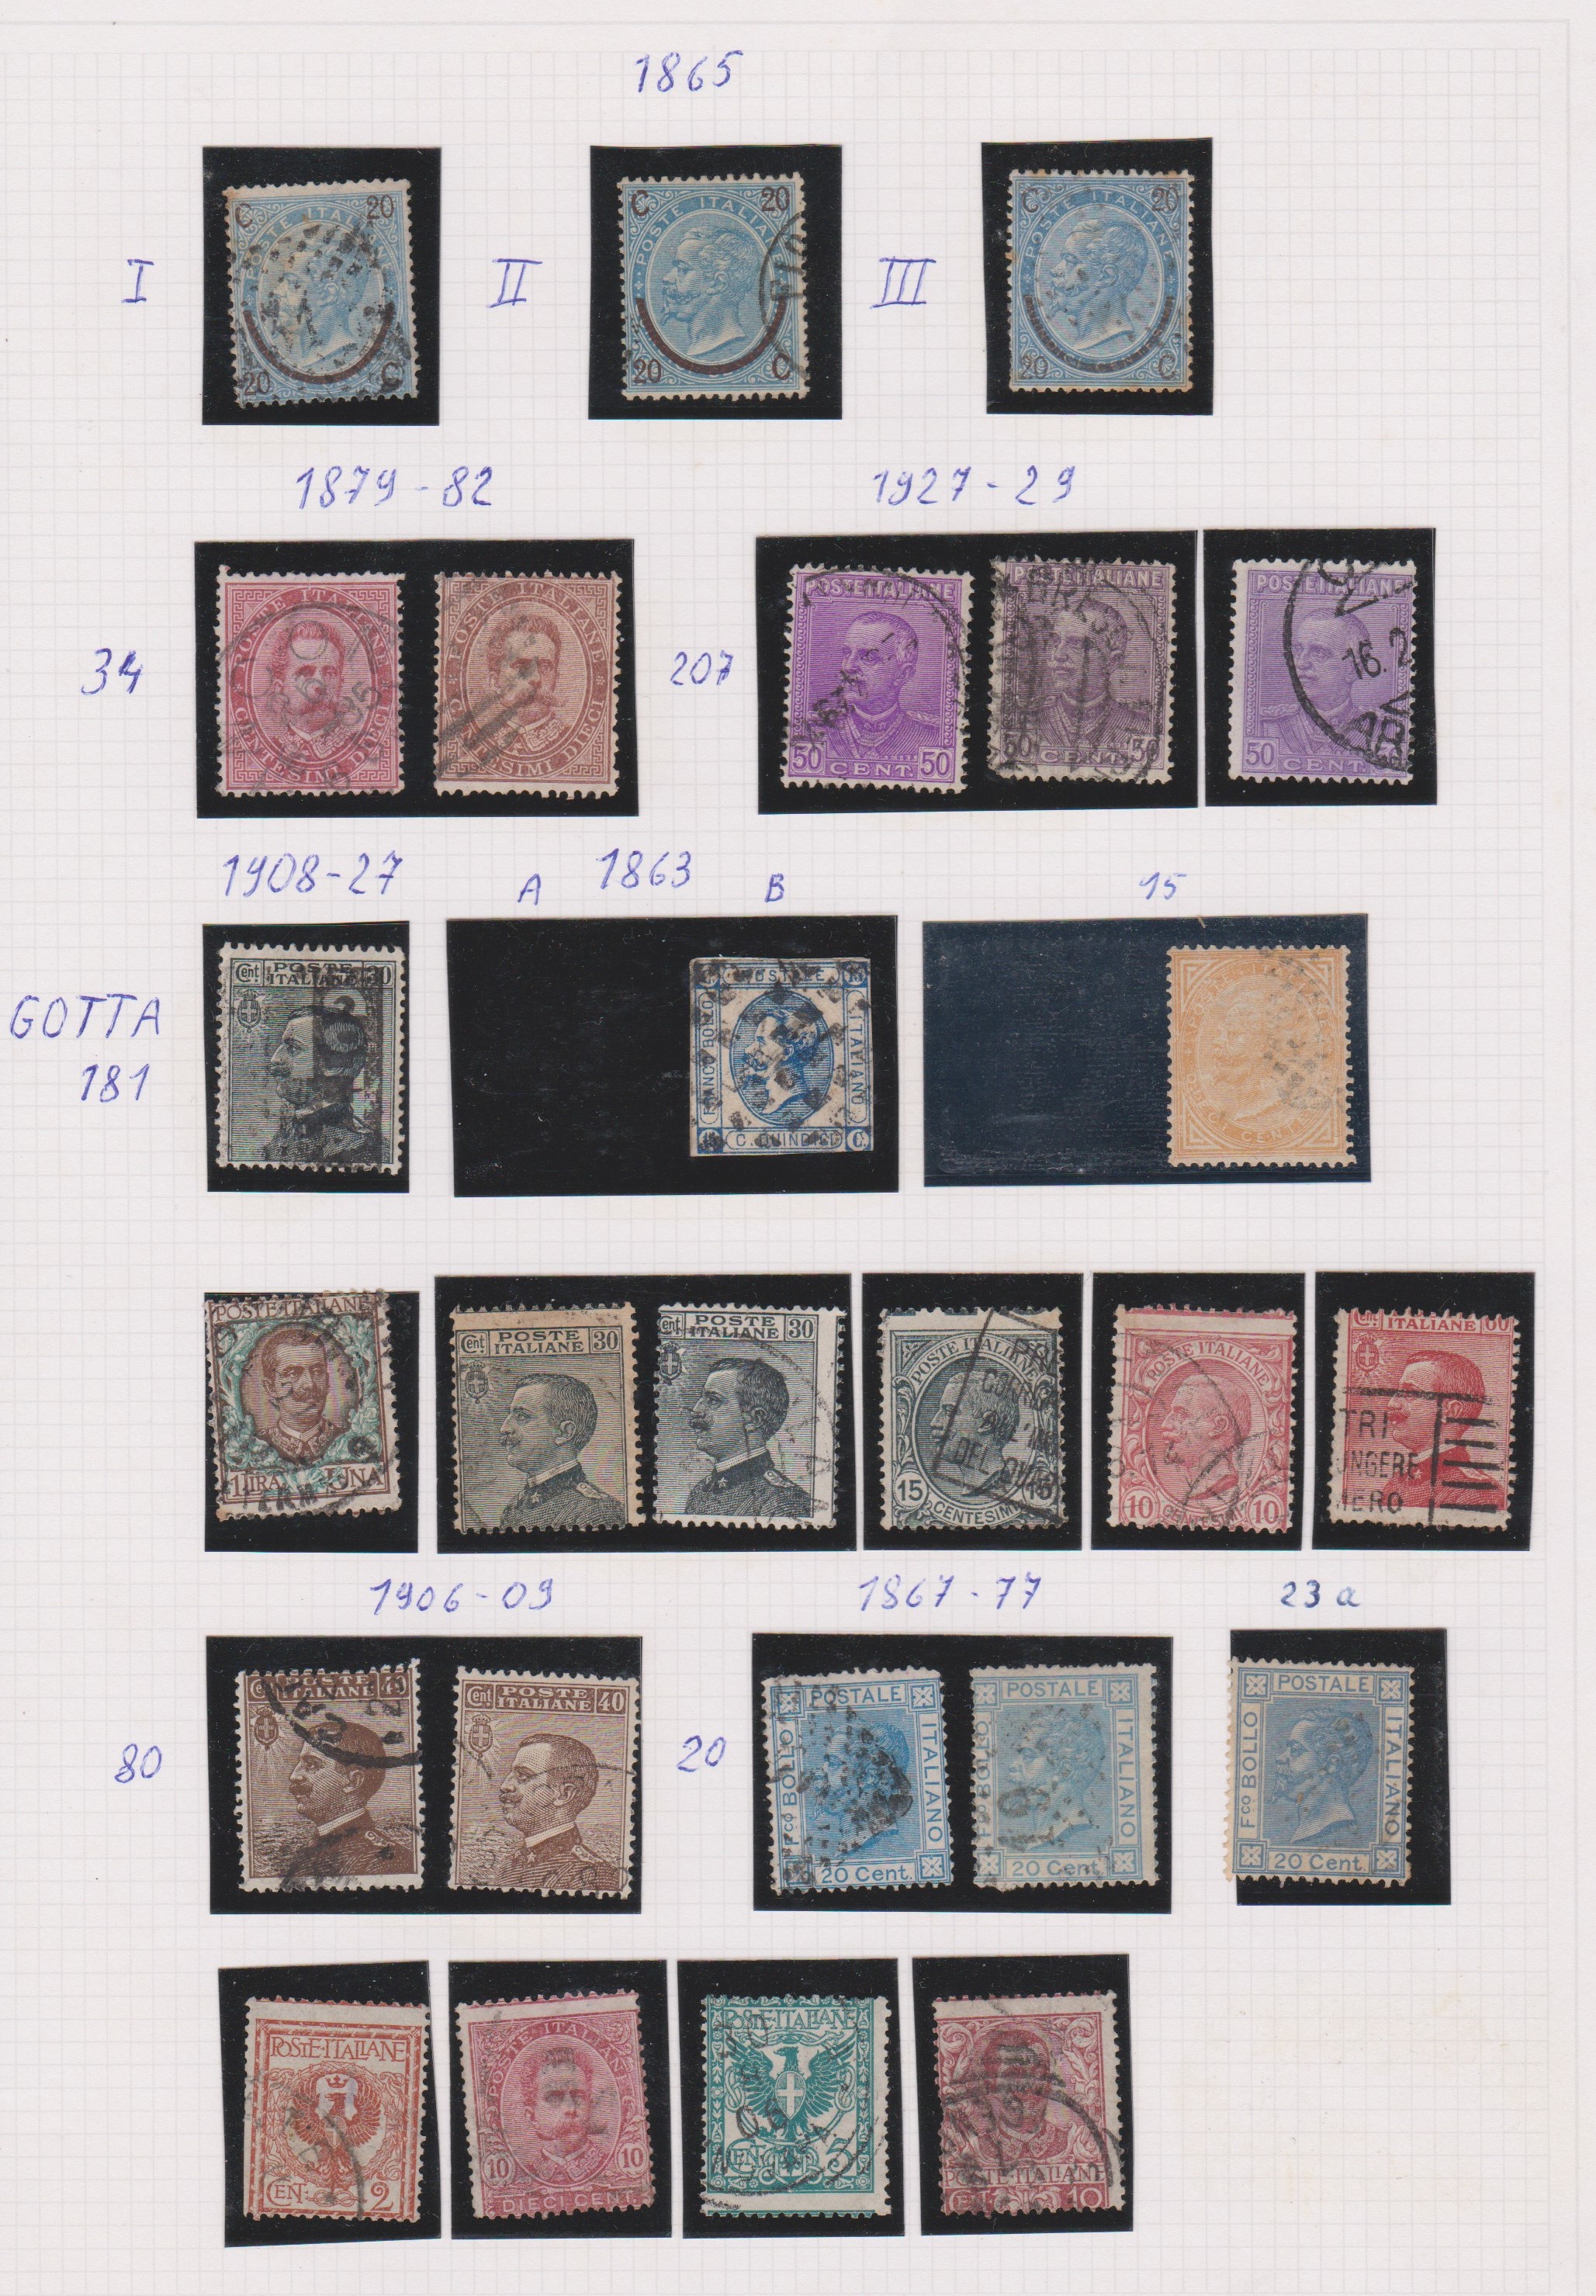 Italy 1863-1956-Selection of 219 used and m/m definitives and commemoratives on (9) pages, some nice